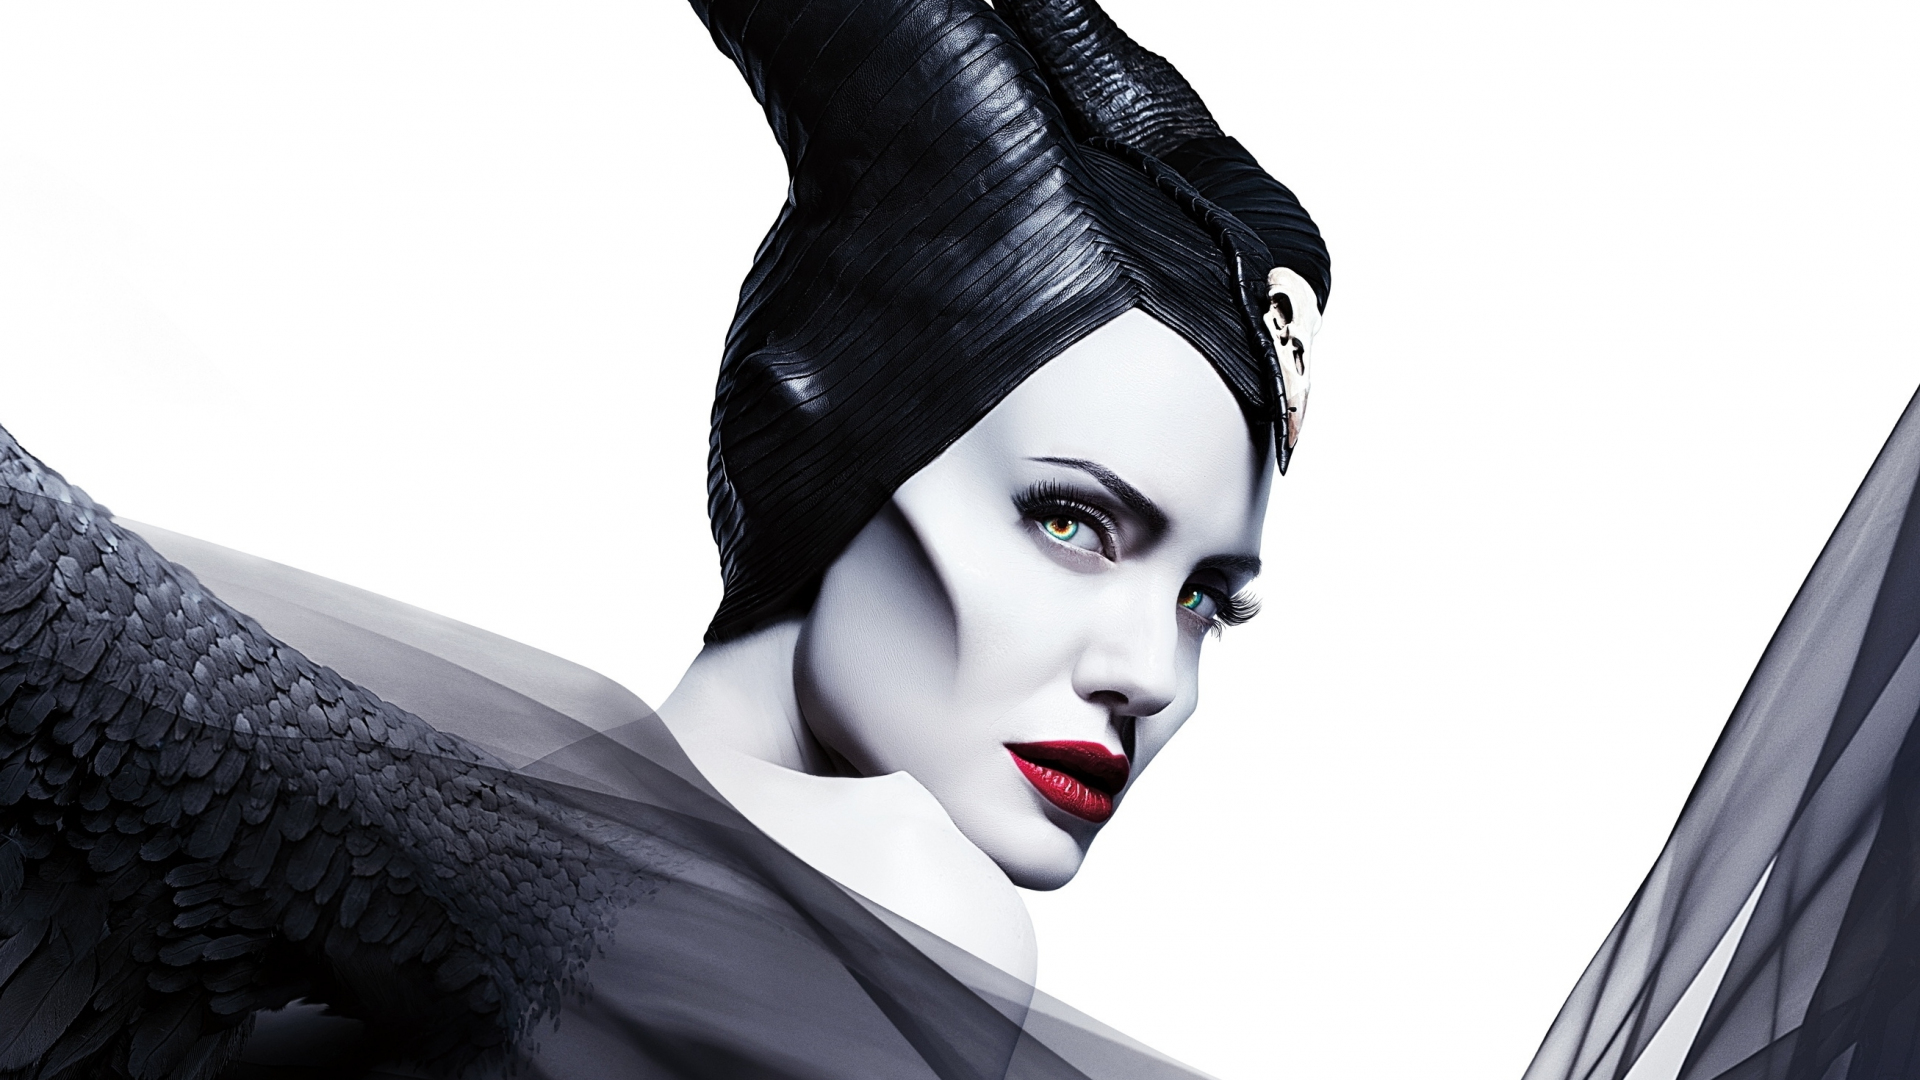 4K Poster Of Maleficent 2 Wallpapers